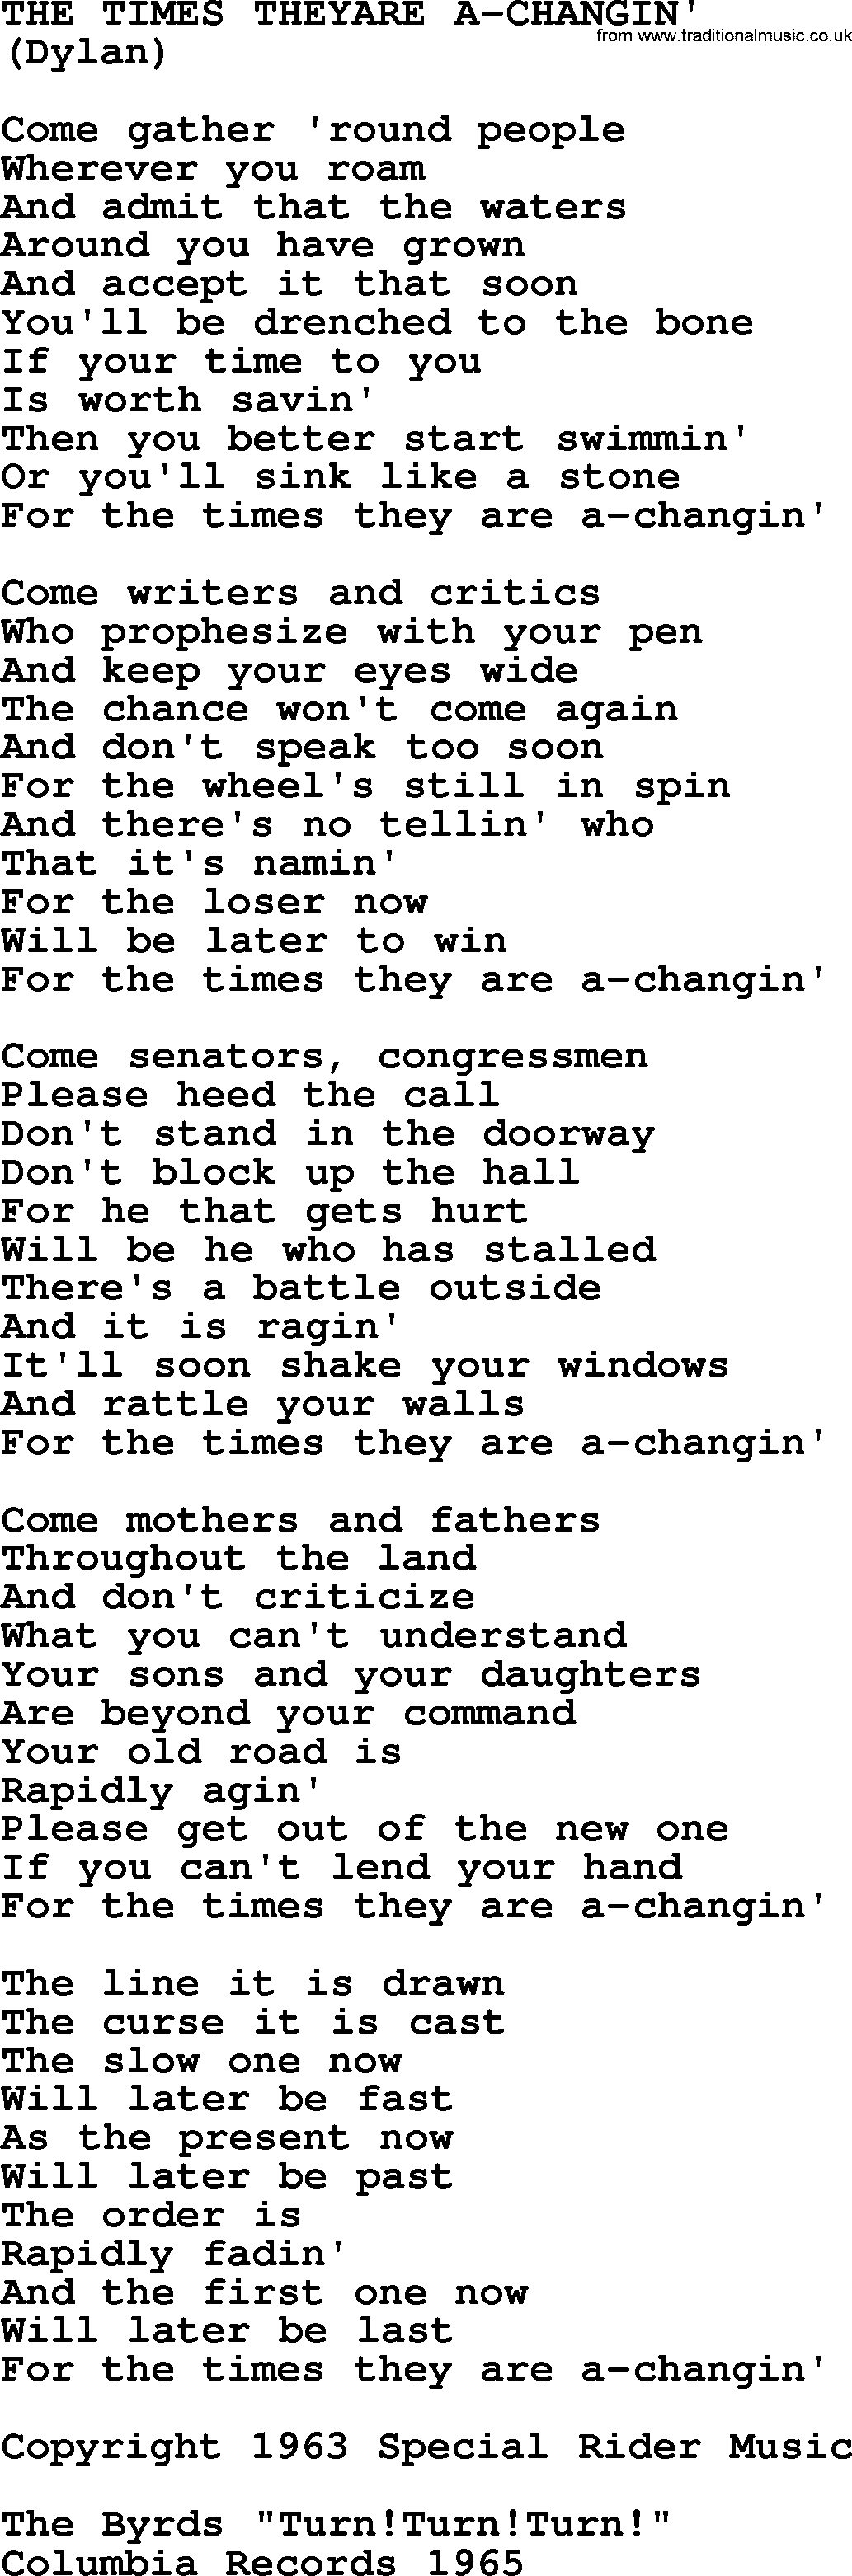 The Byrds song The Times Theyare A Changin', lyrics